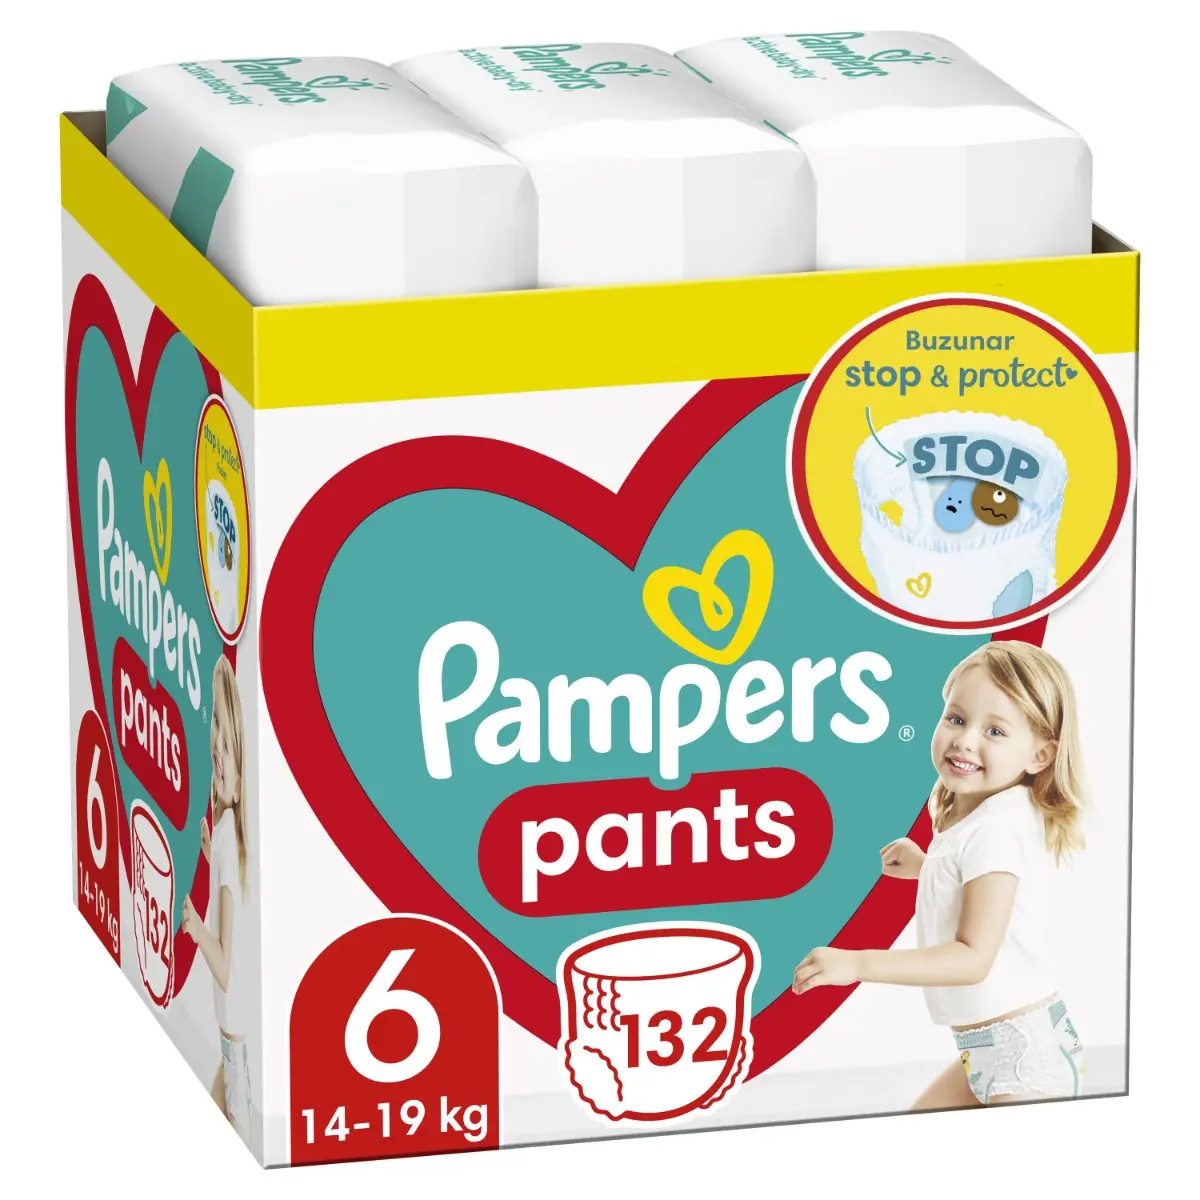 pampers 2 doz